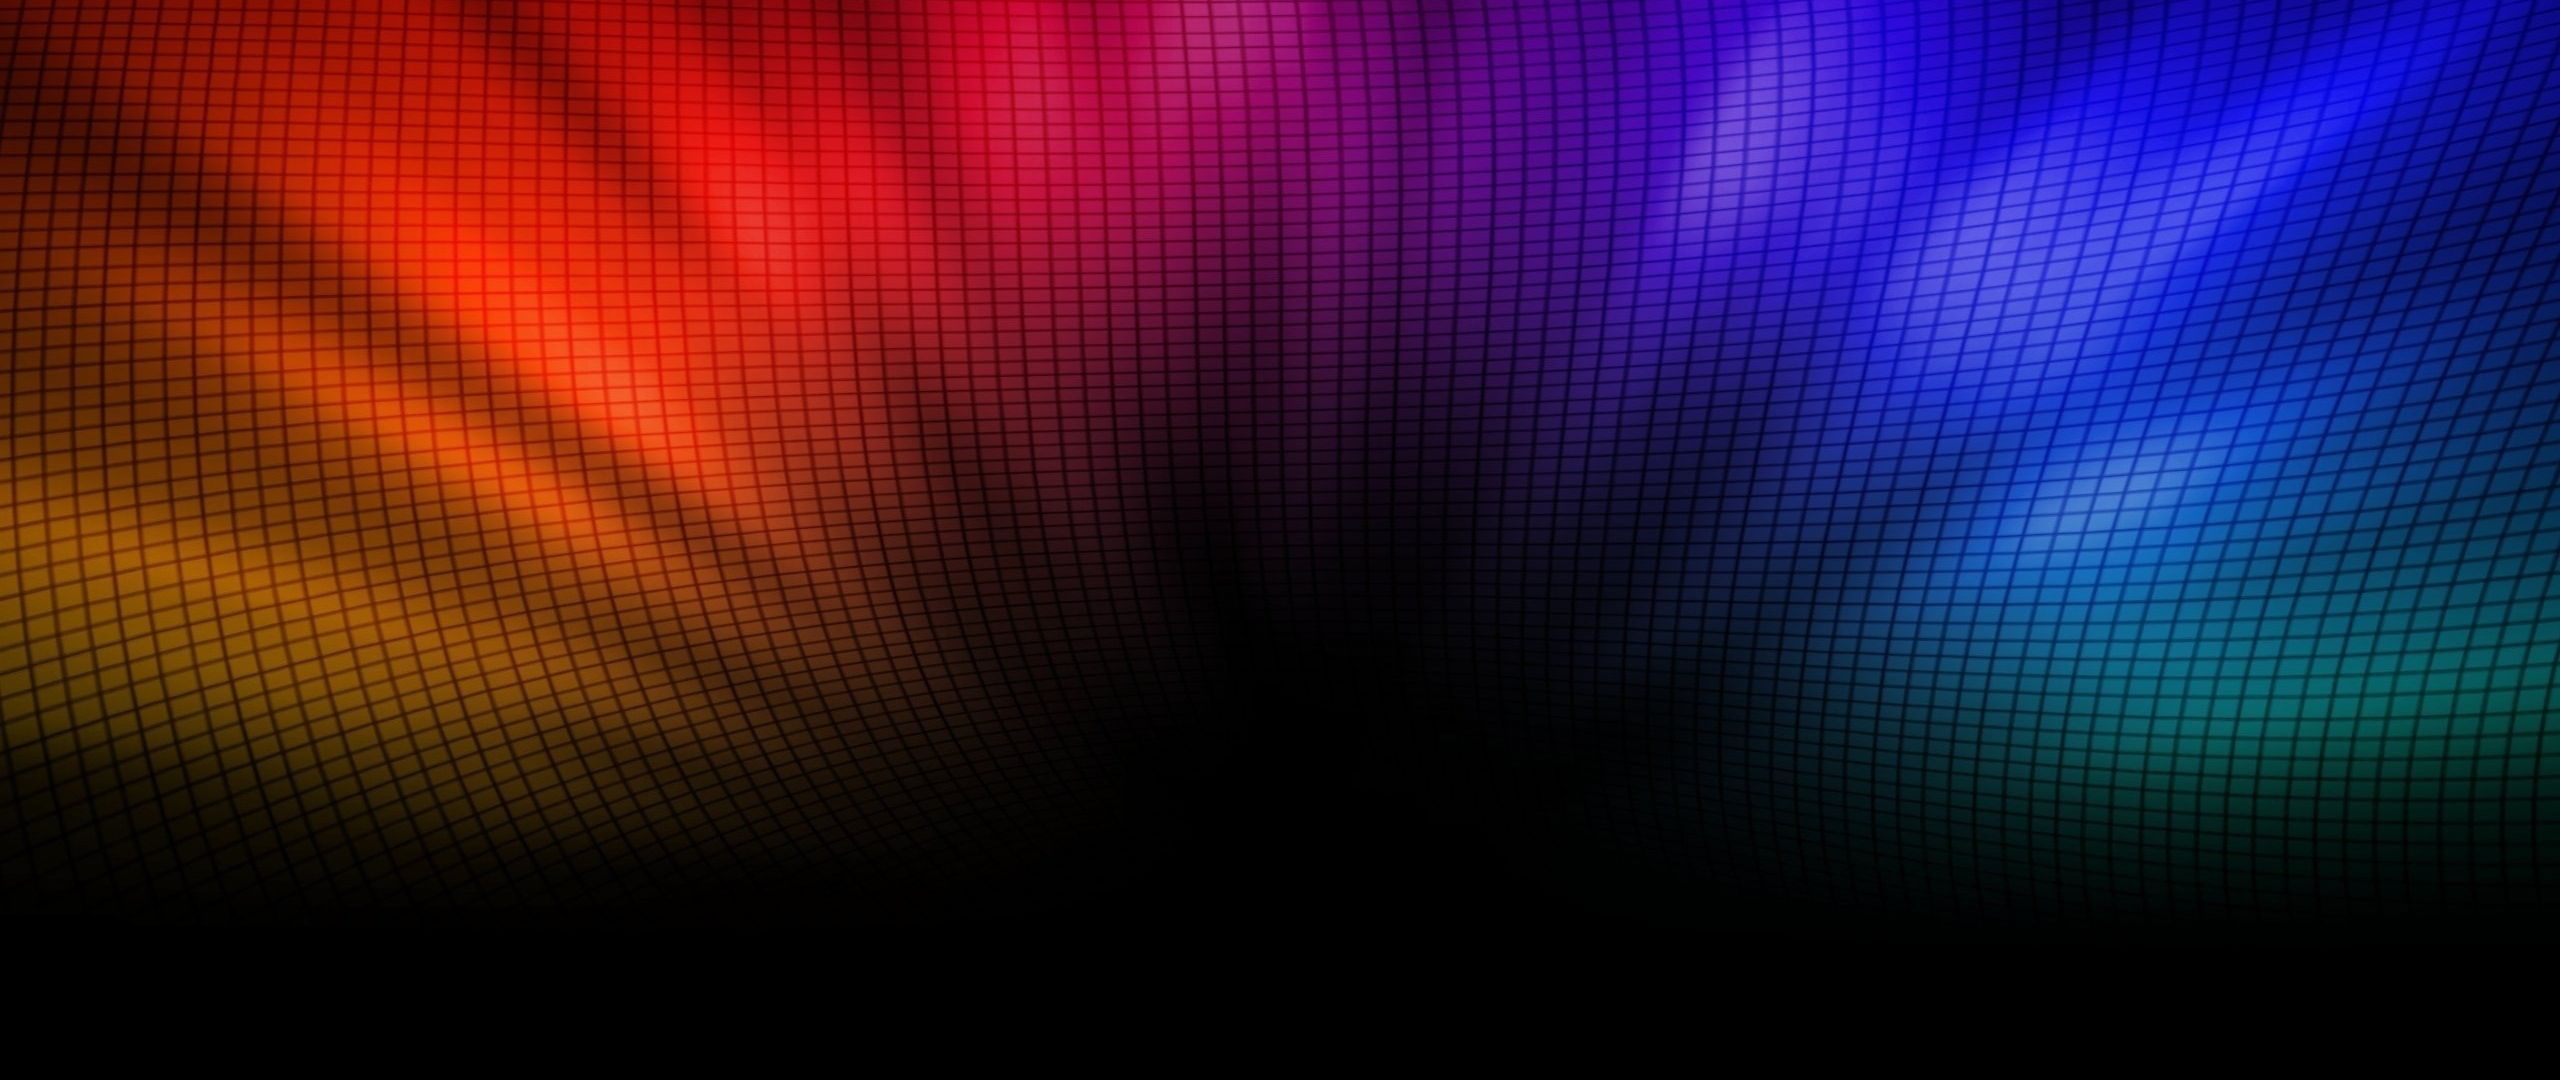 Download Wallpaper 2560x1080 Colorful, Background, Point 2560x1080 ...